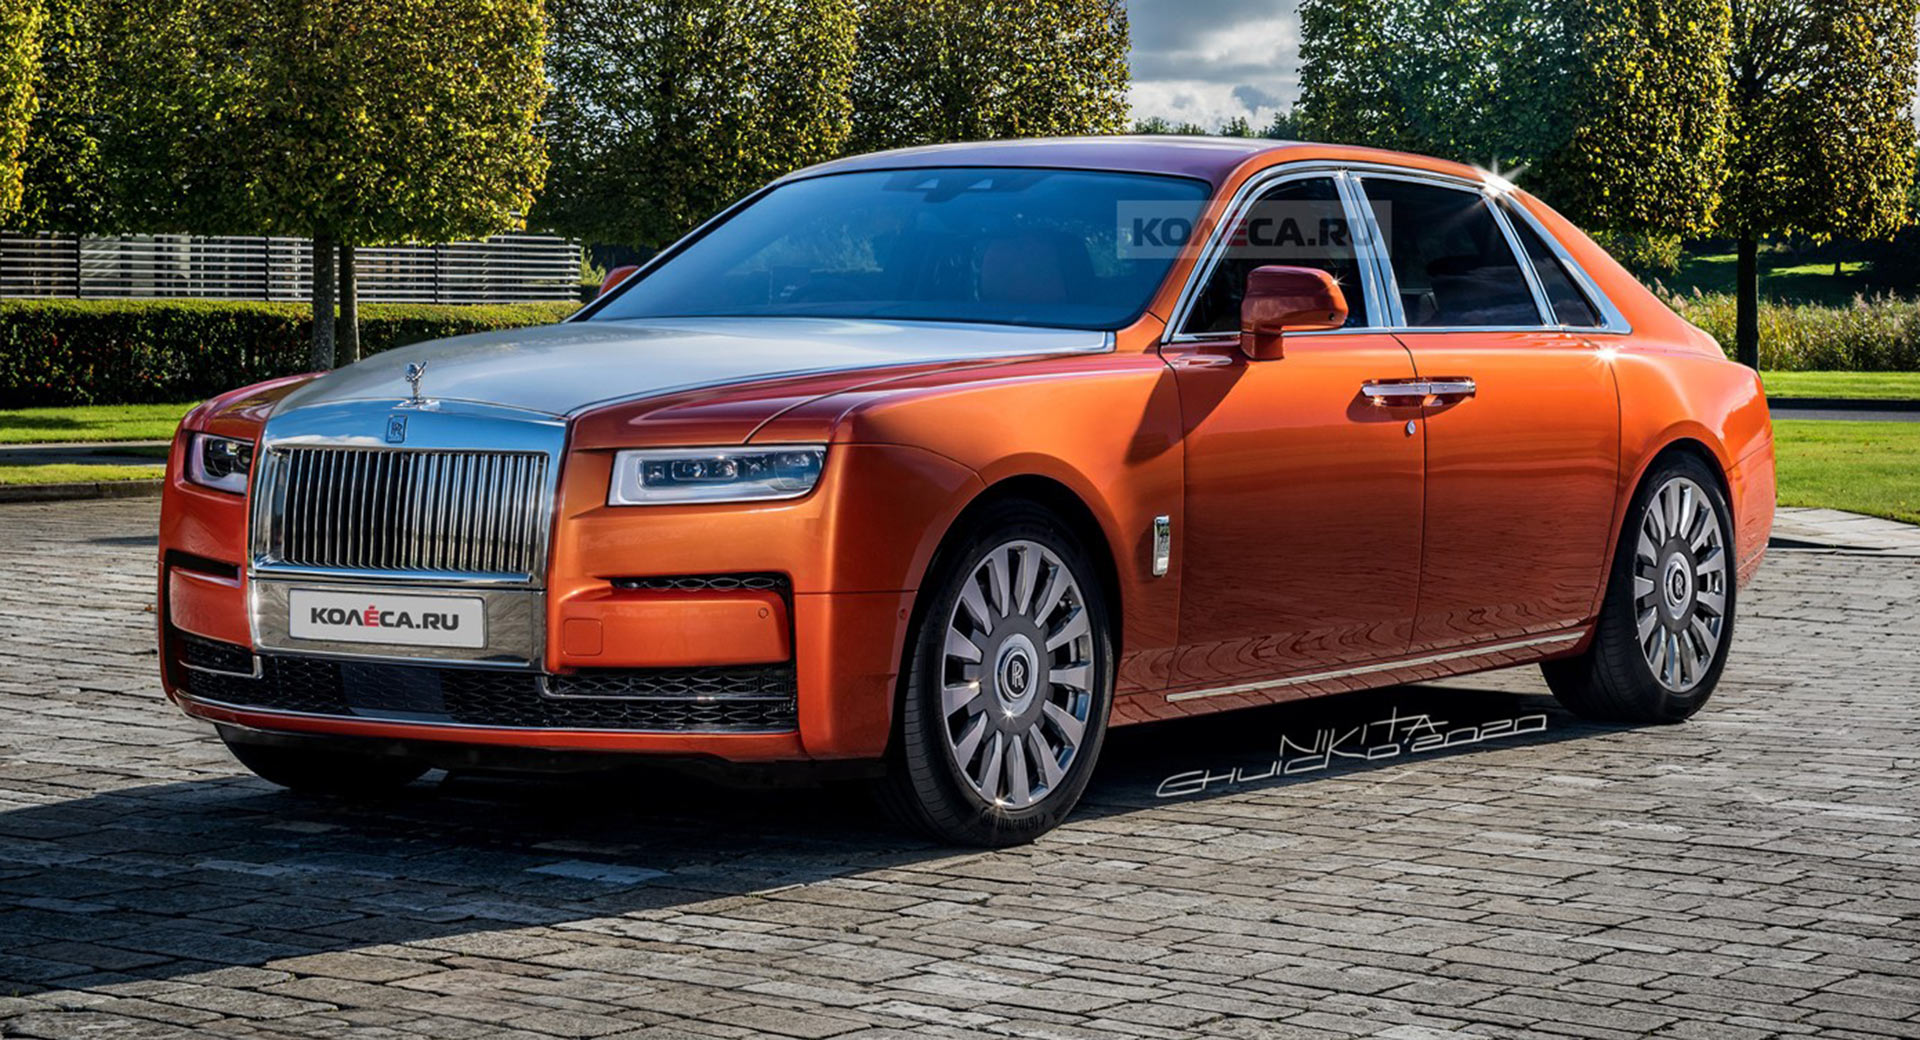 Review update: 2021 Rolls-Royce Ghost summons a sense of occasion